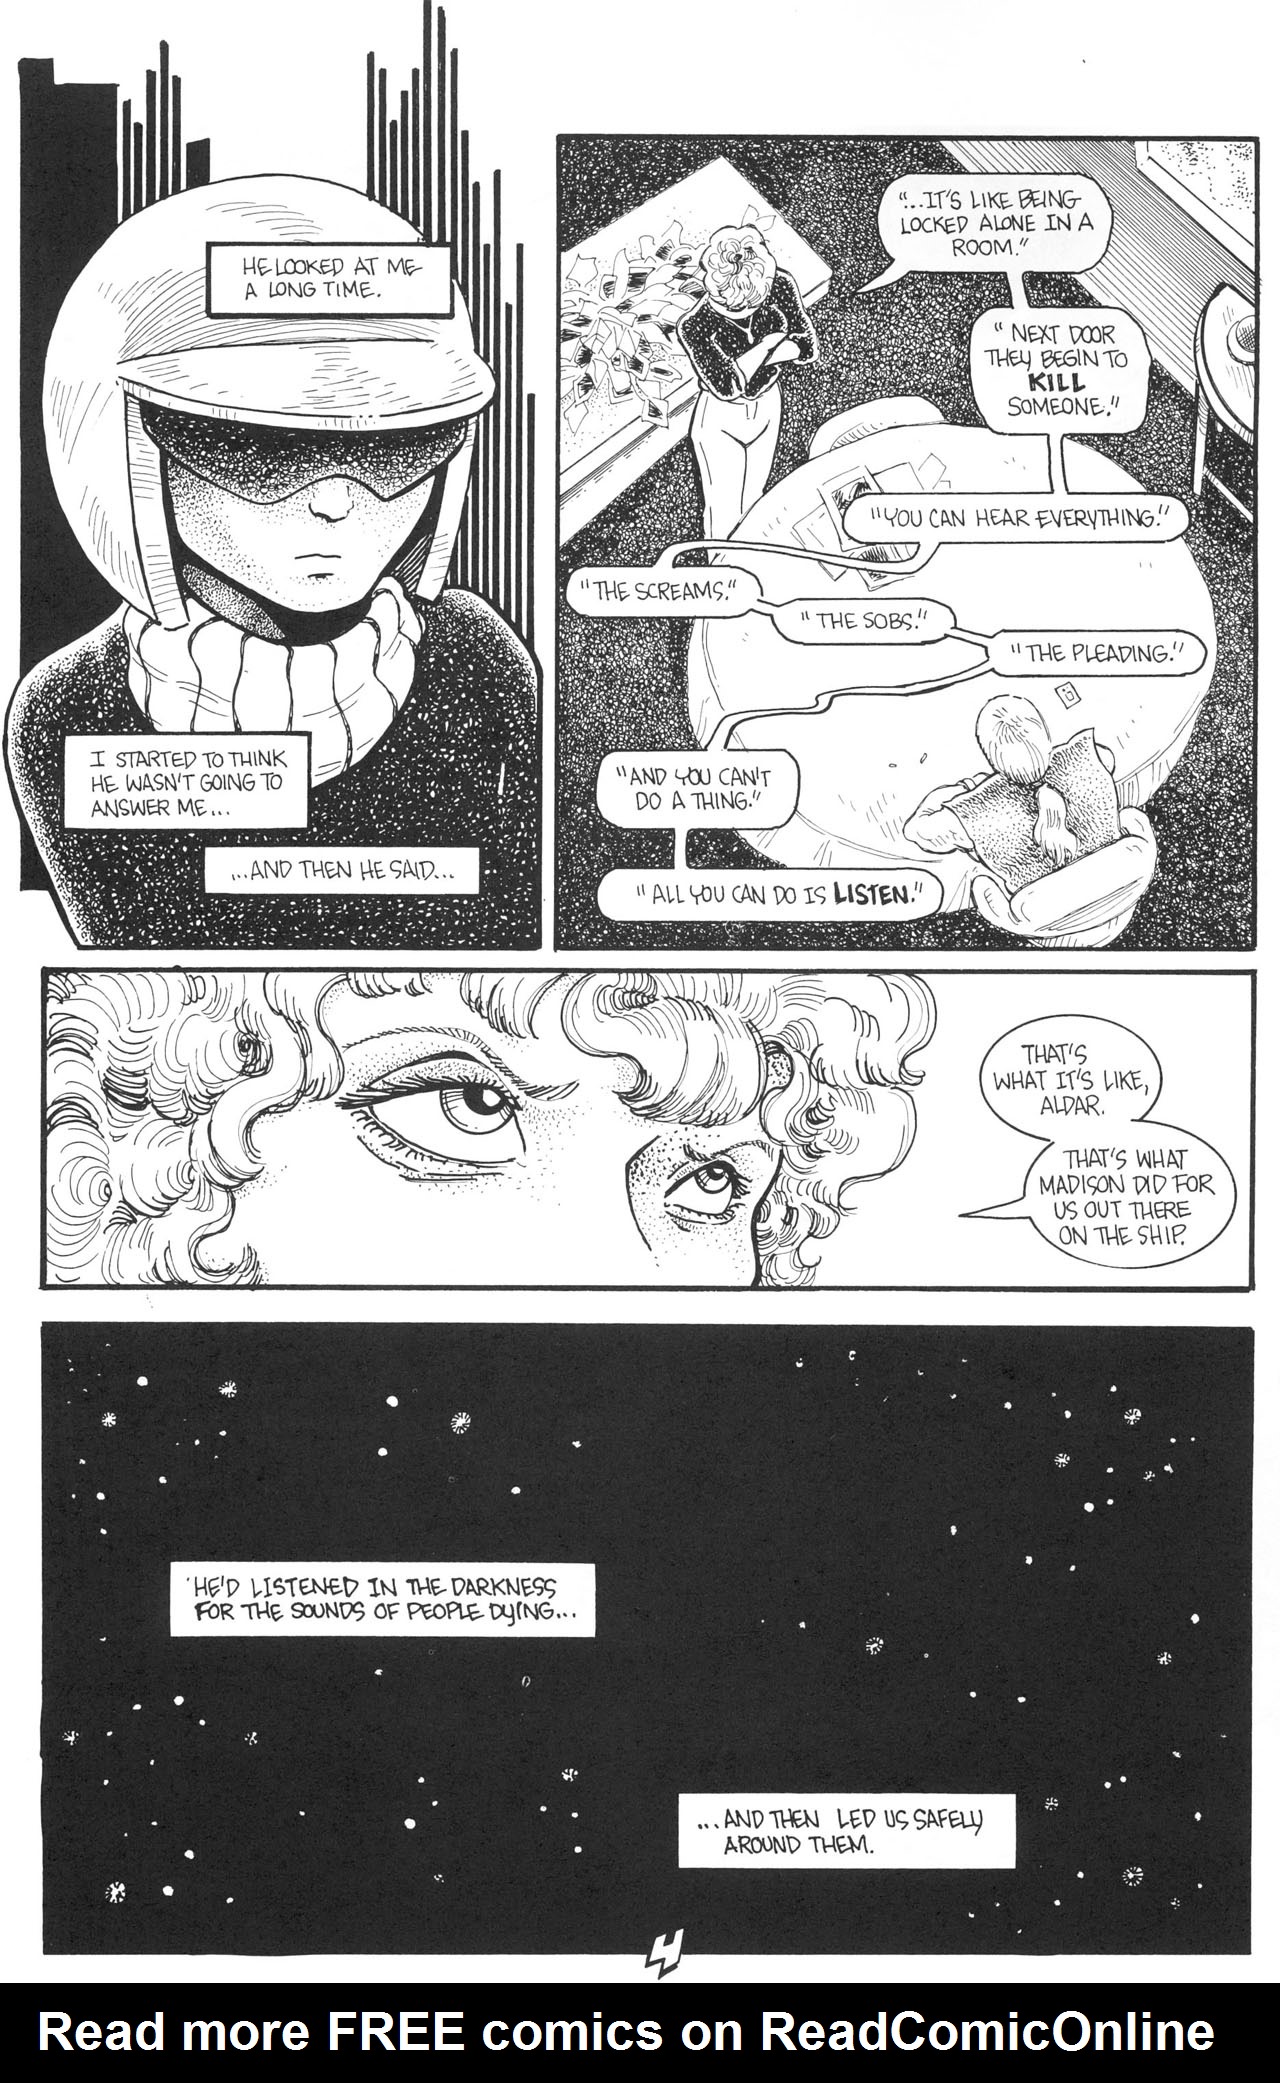 Read online Wandering Star comic -  Issue #5 - 6